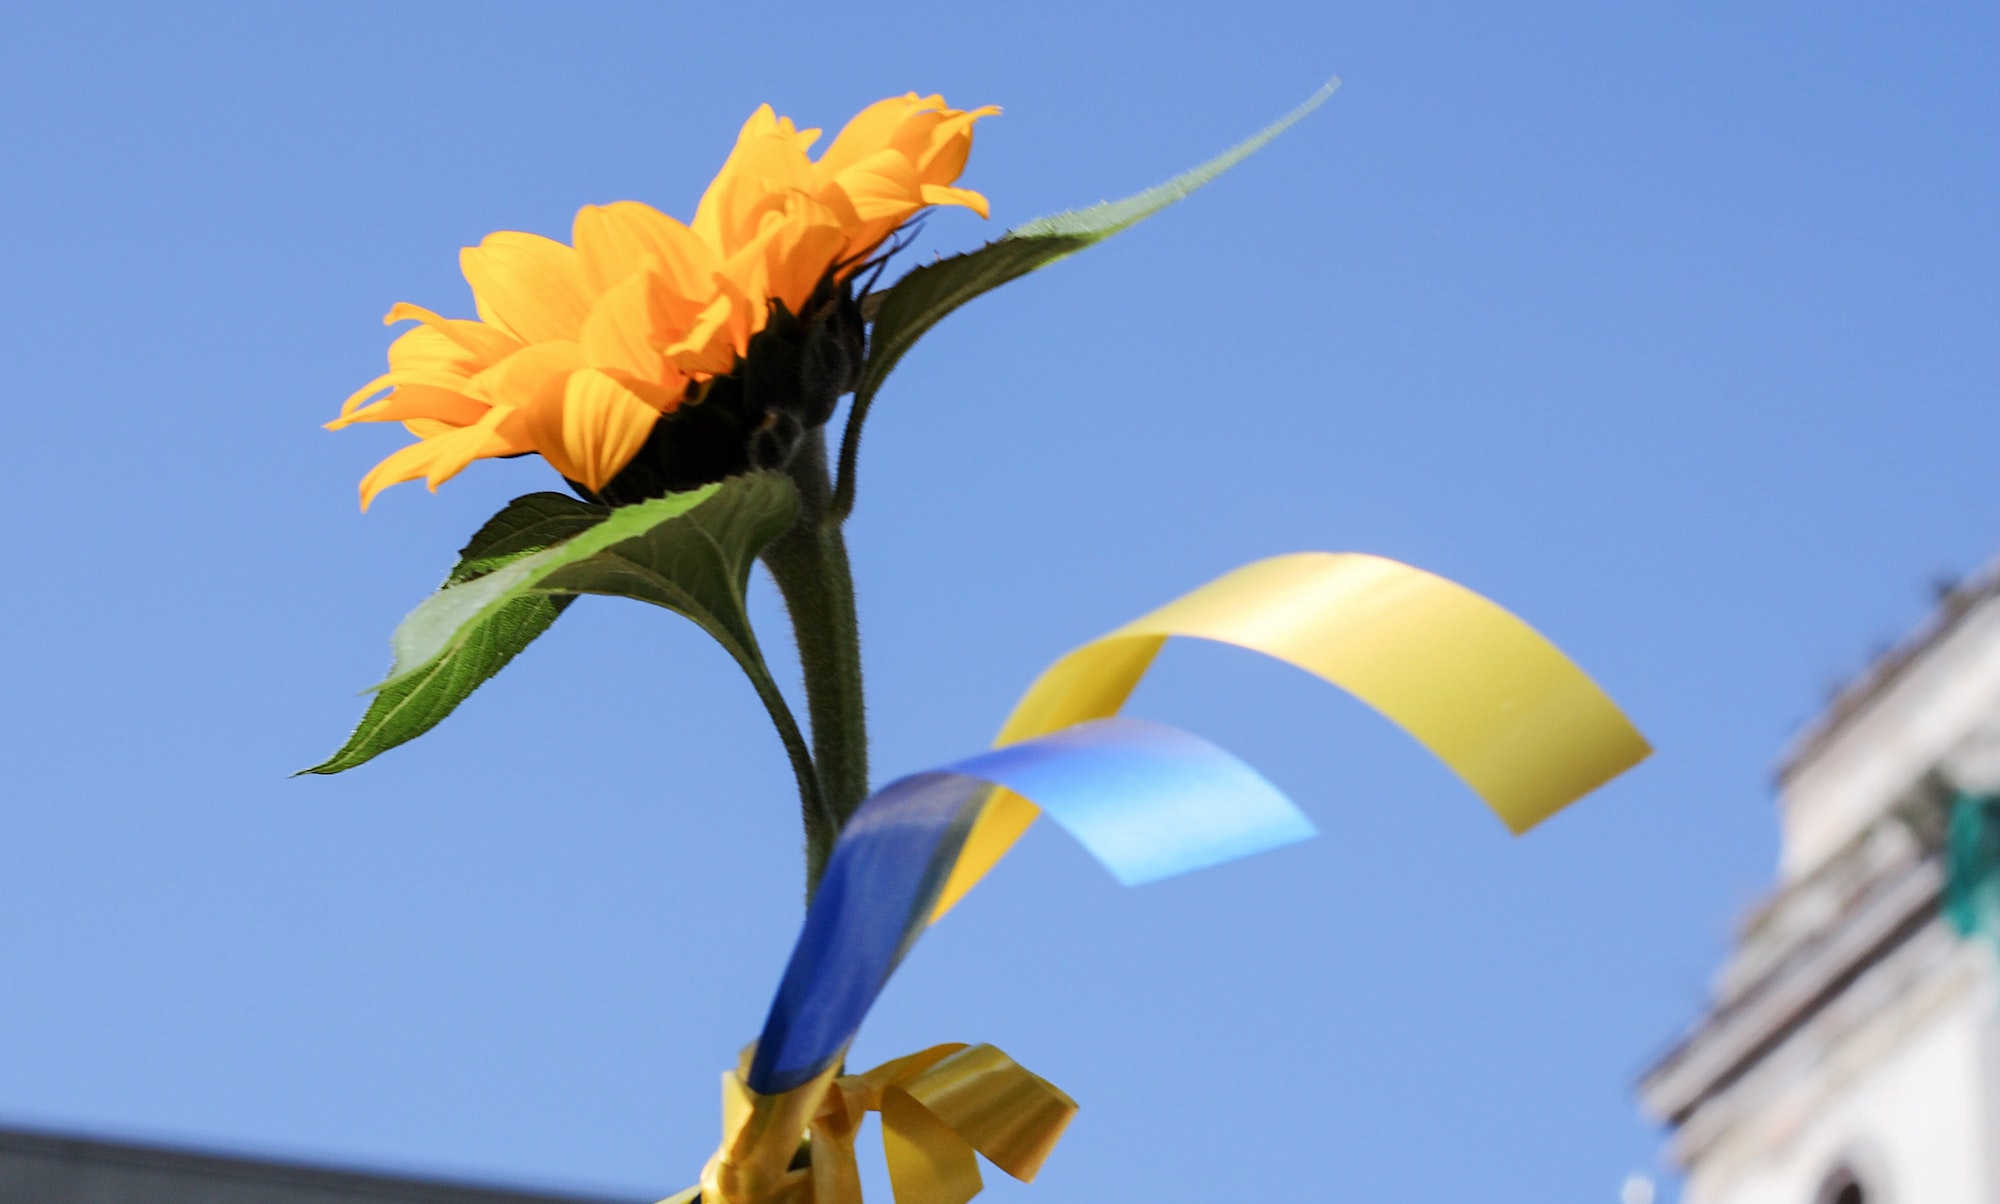 Flower with blue and yellow ribbons tied around the stem